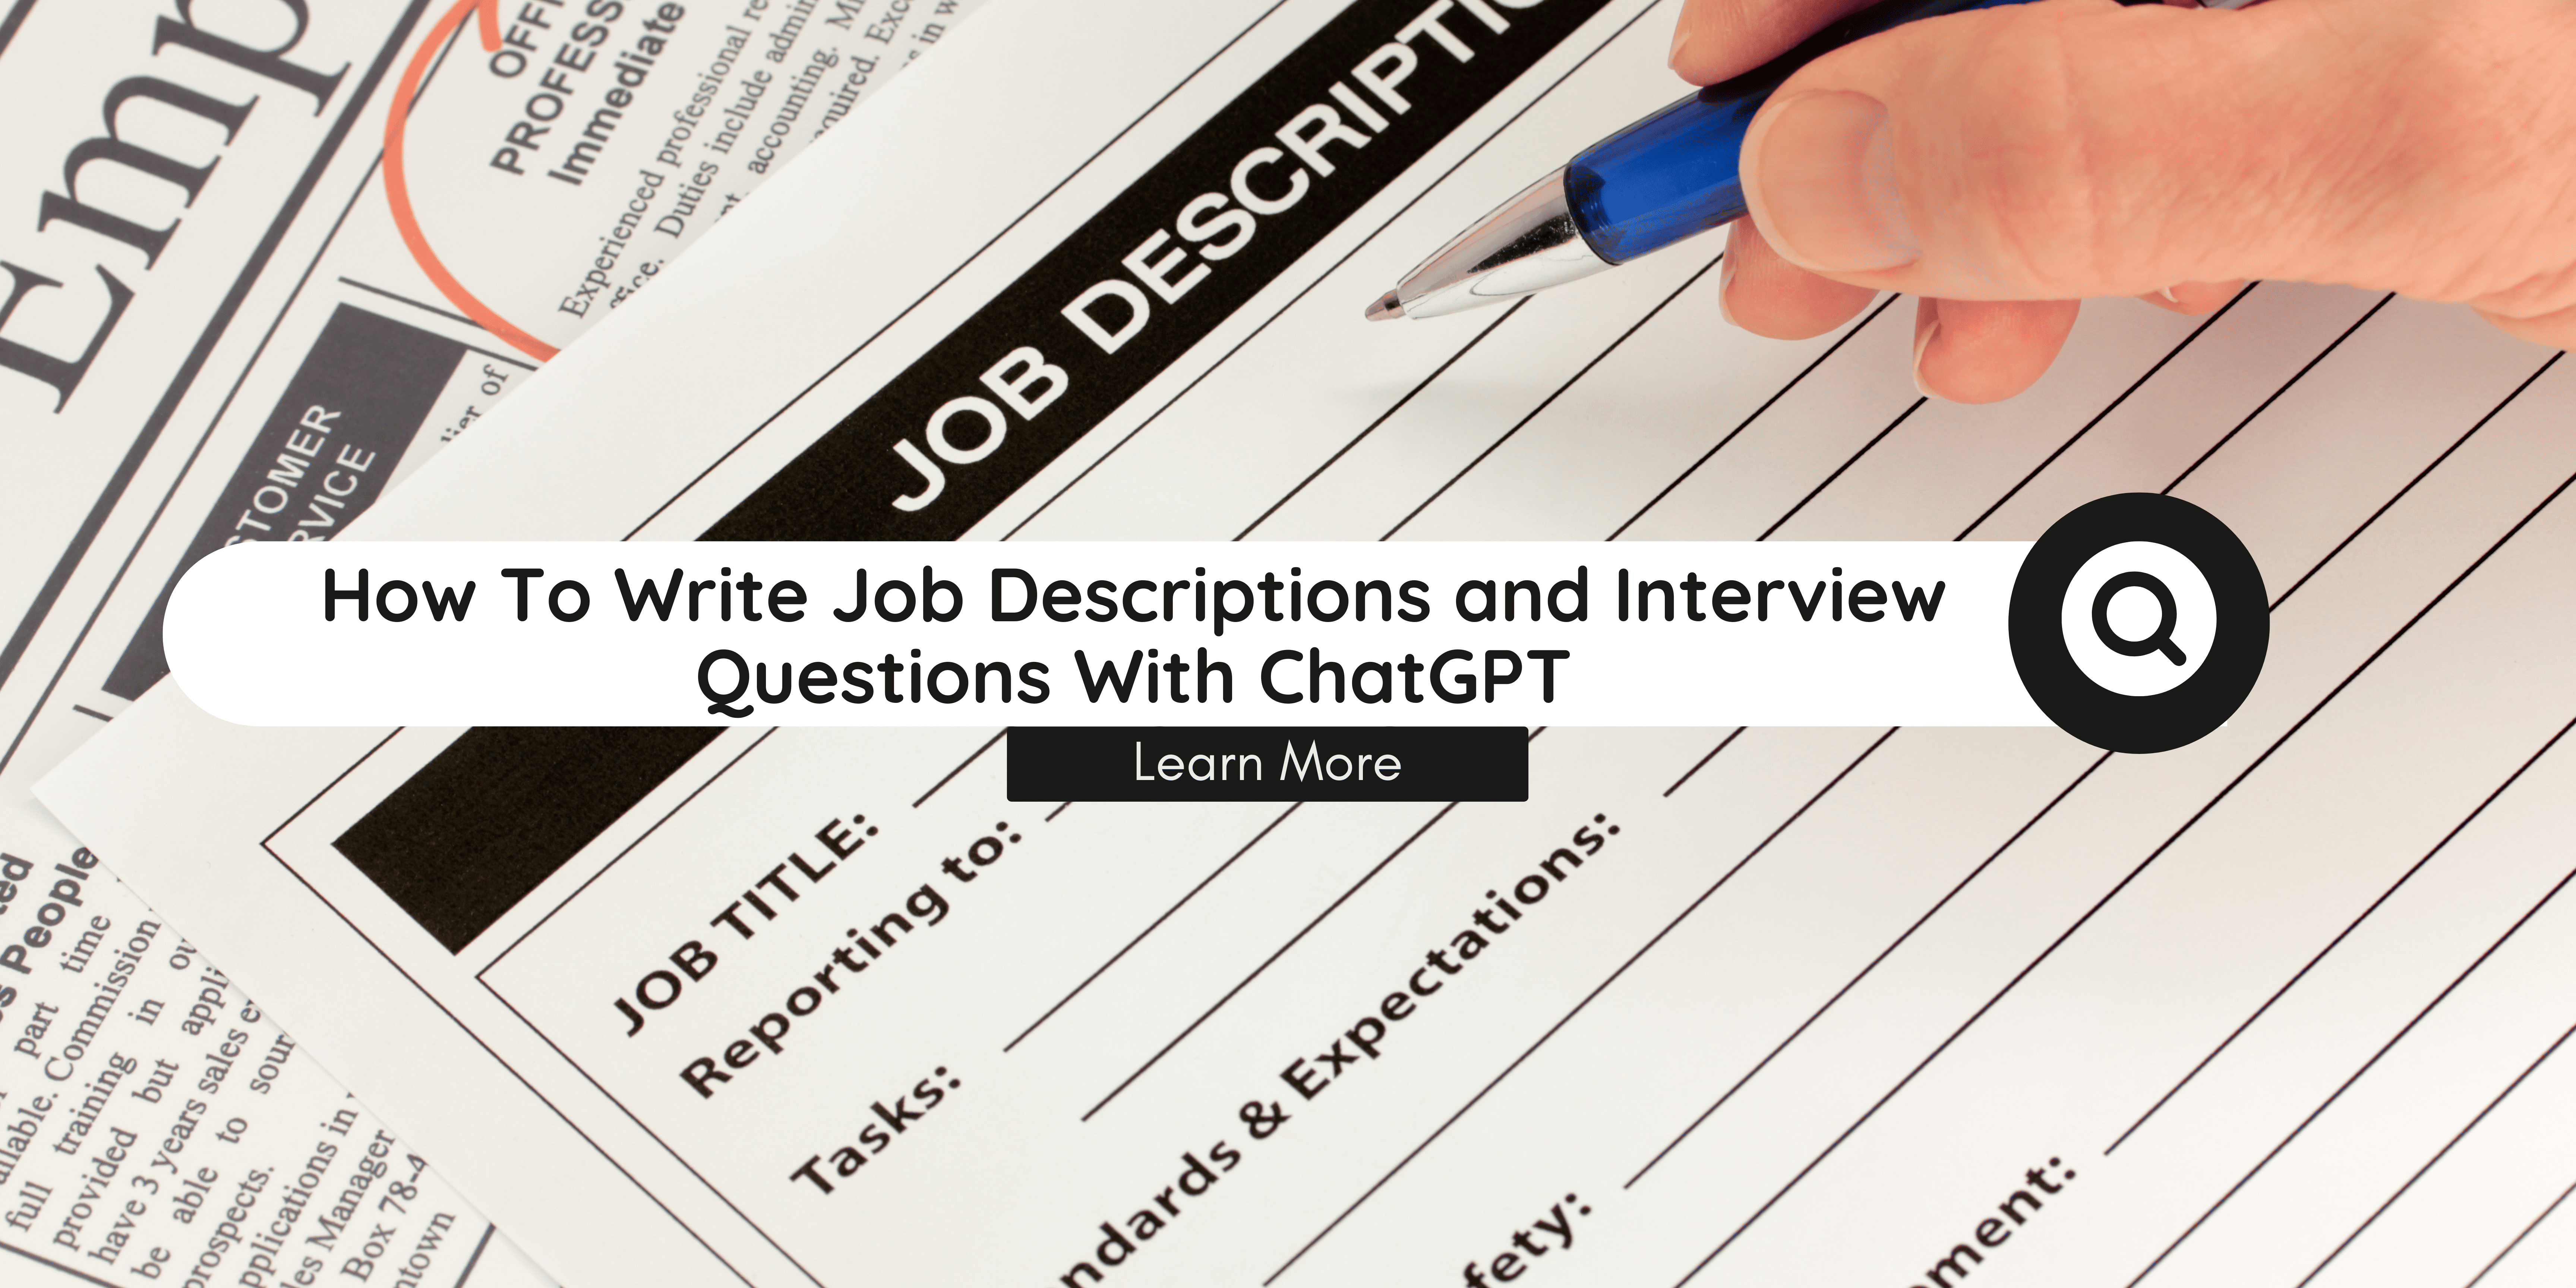 How To Write Job Descriptions and Interview Questions With ChatGPT